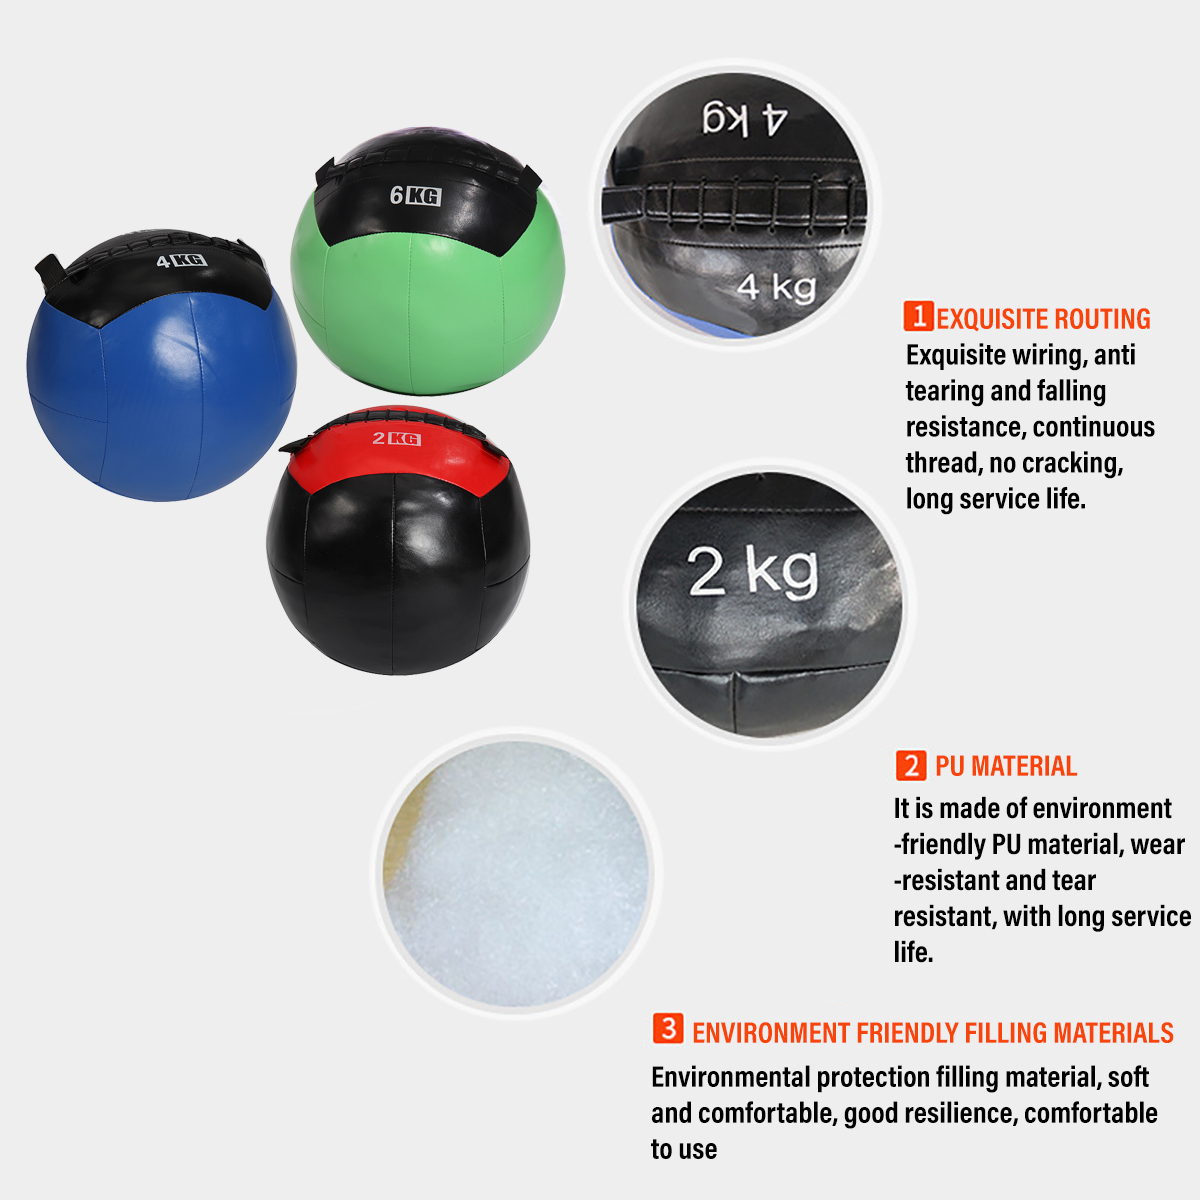 246KG-Weighted-Fitness-Balance-Ball-PU-Soft-Gym-Inelastic-Training-Exerciser-1748206-3